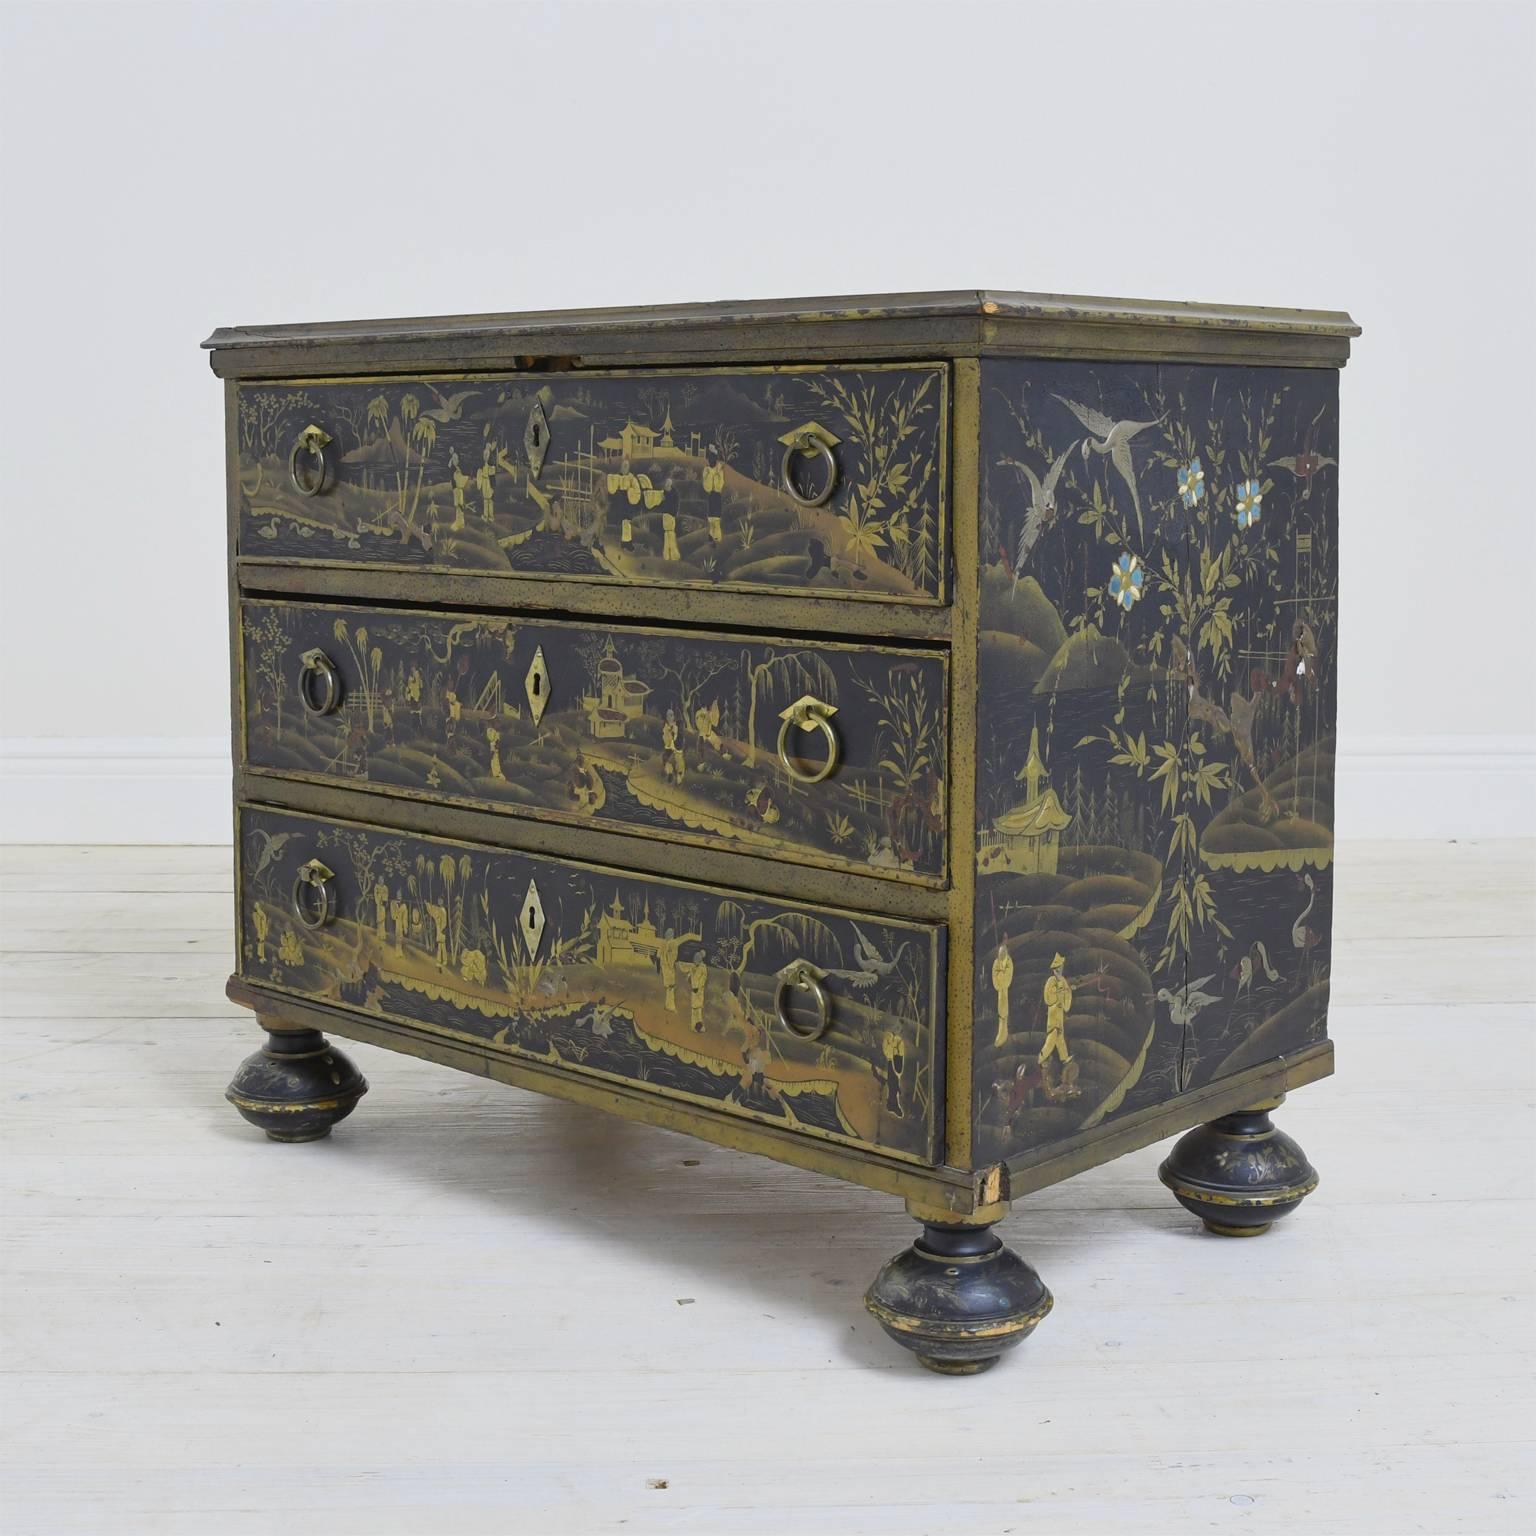 A very handsome chinoiserie chest in lacquered wood with japanning depicting Chinese scenes with figures and birds in landscape and offering three drawers. Chest rests on turned bun feet. West Indies, circa late 1700s.

Makes a lovely end